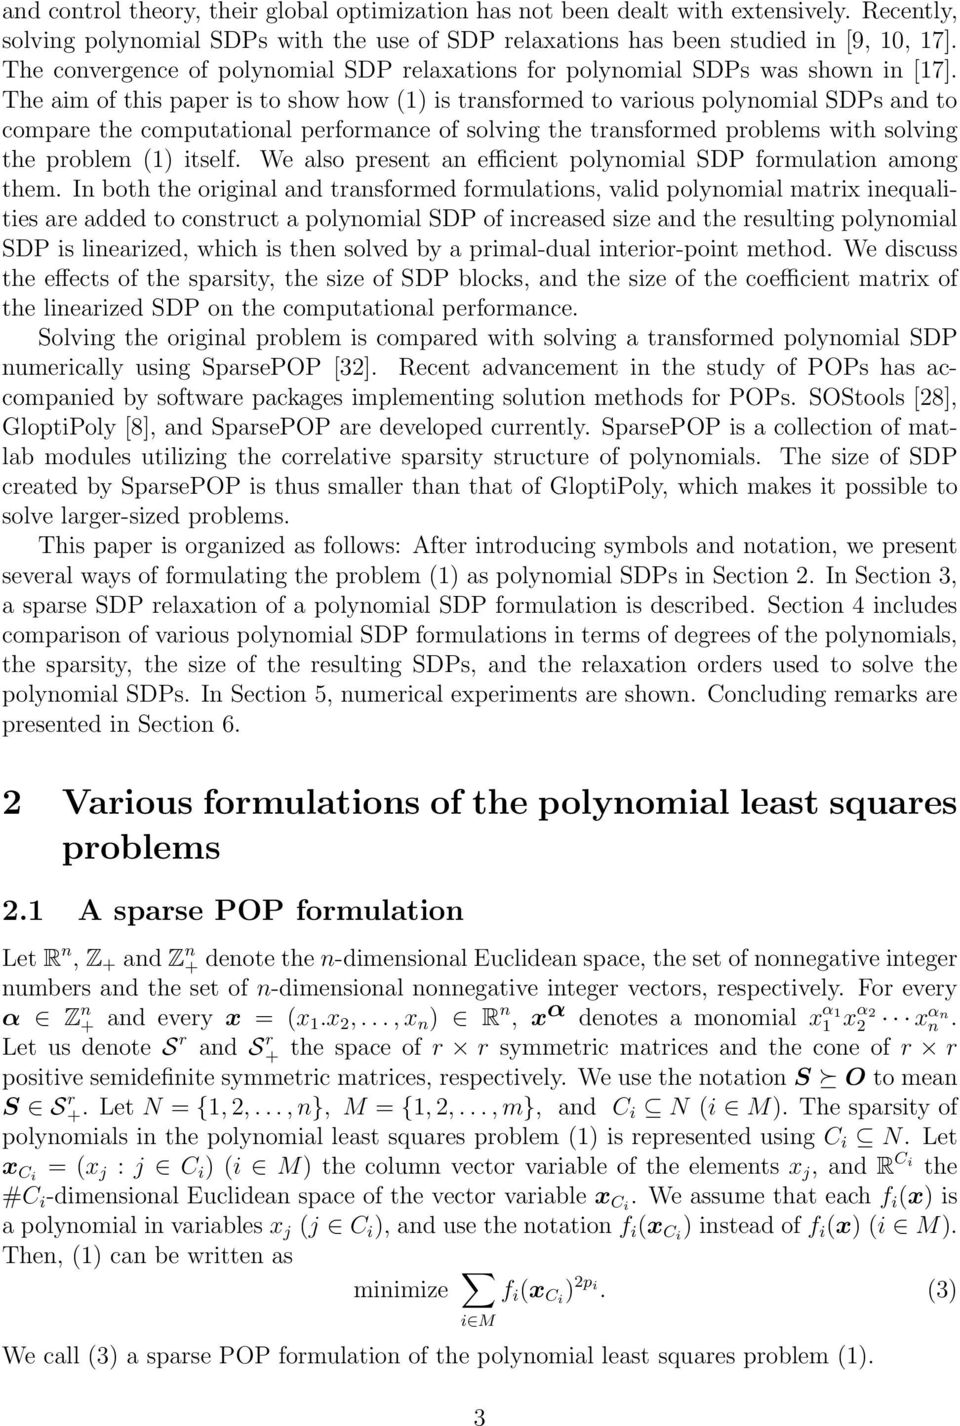 The aim of this paper is to show how (1) is transformed to various polynomial SDPs and to compare the computational performance of solving the transformed problems with solving the problem (1) itself.